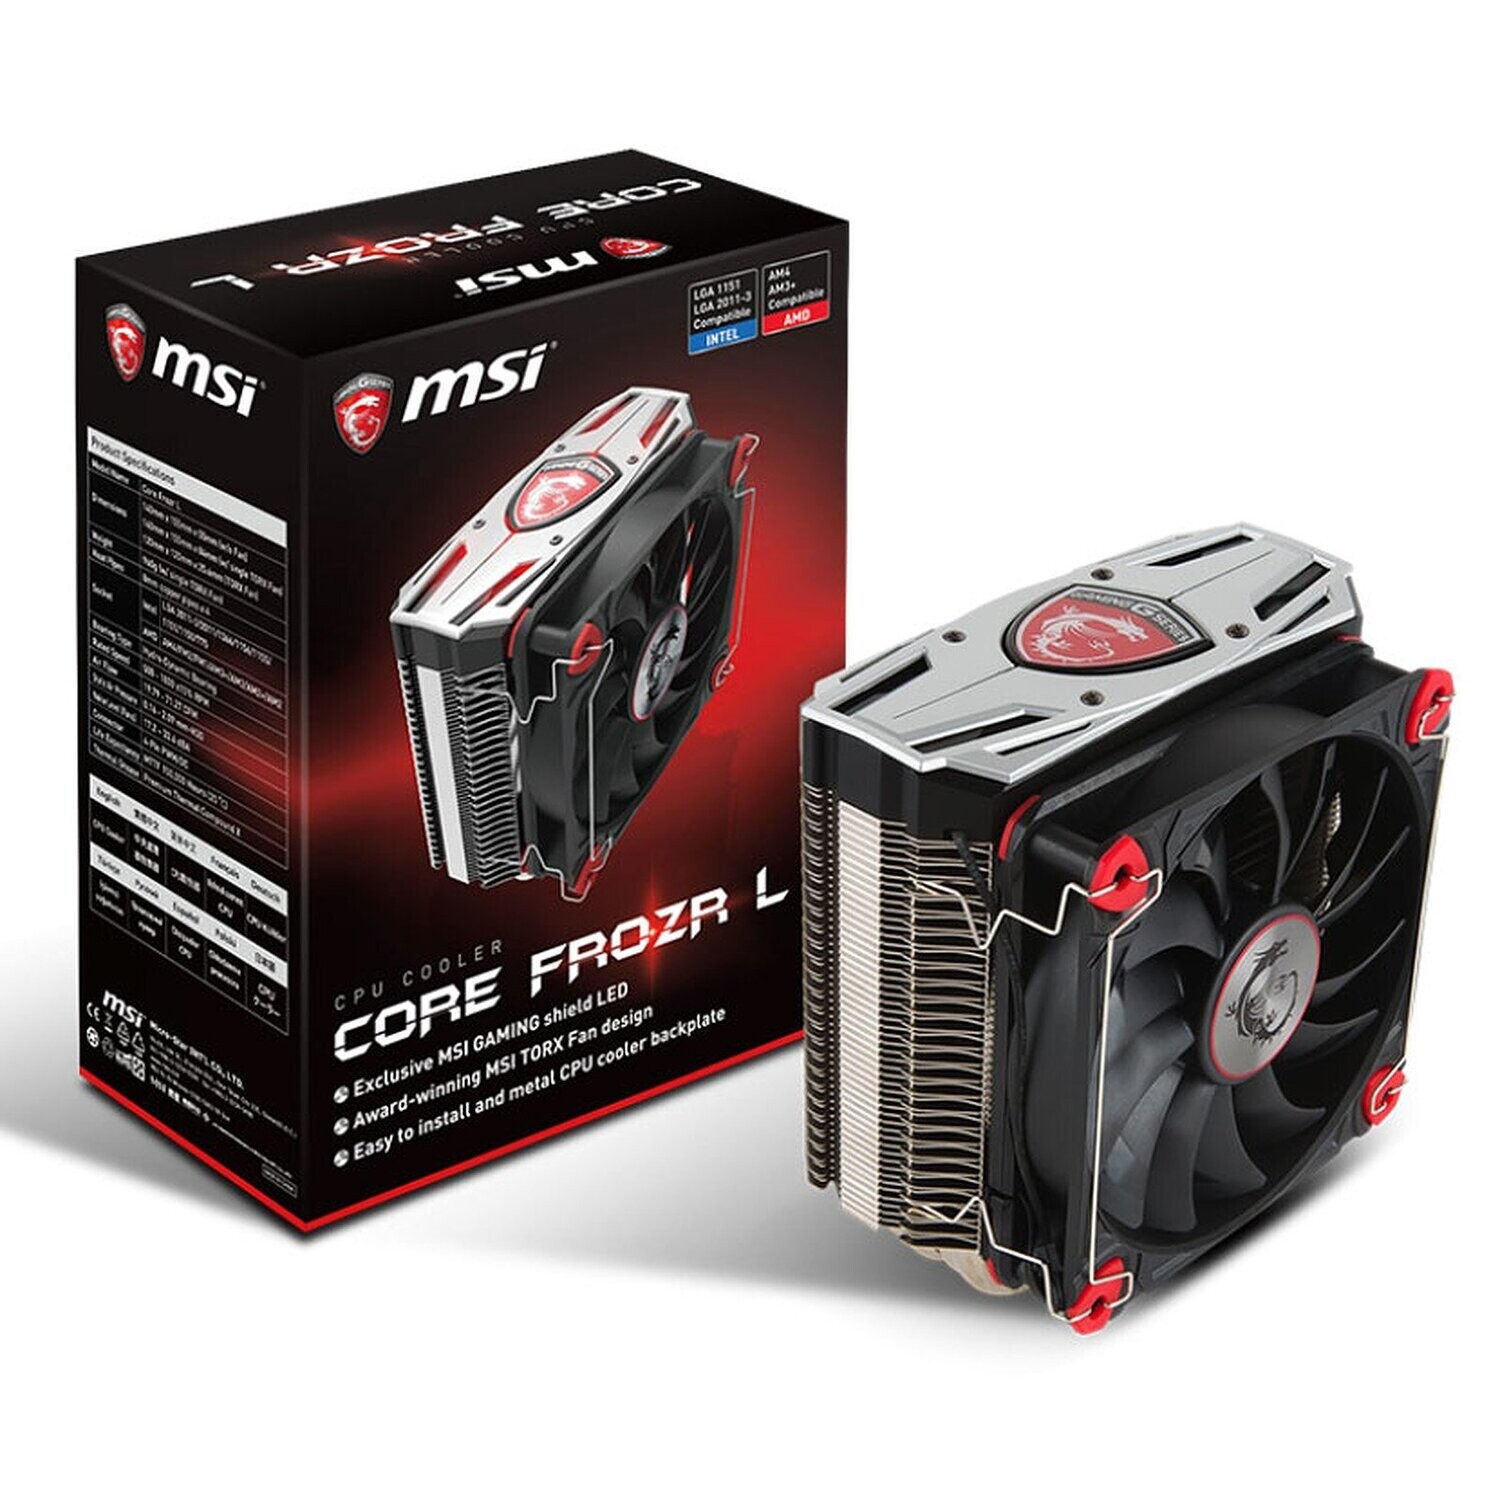 Msi Cpu cooler Core Frozr S